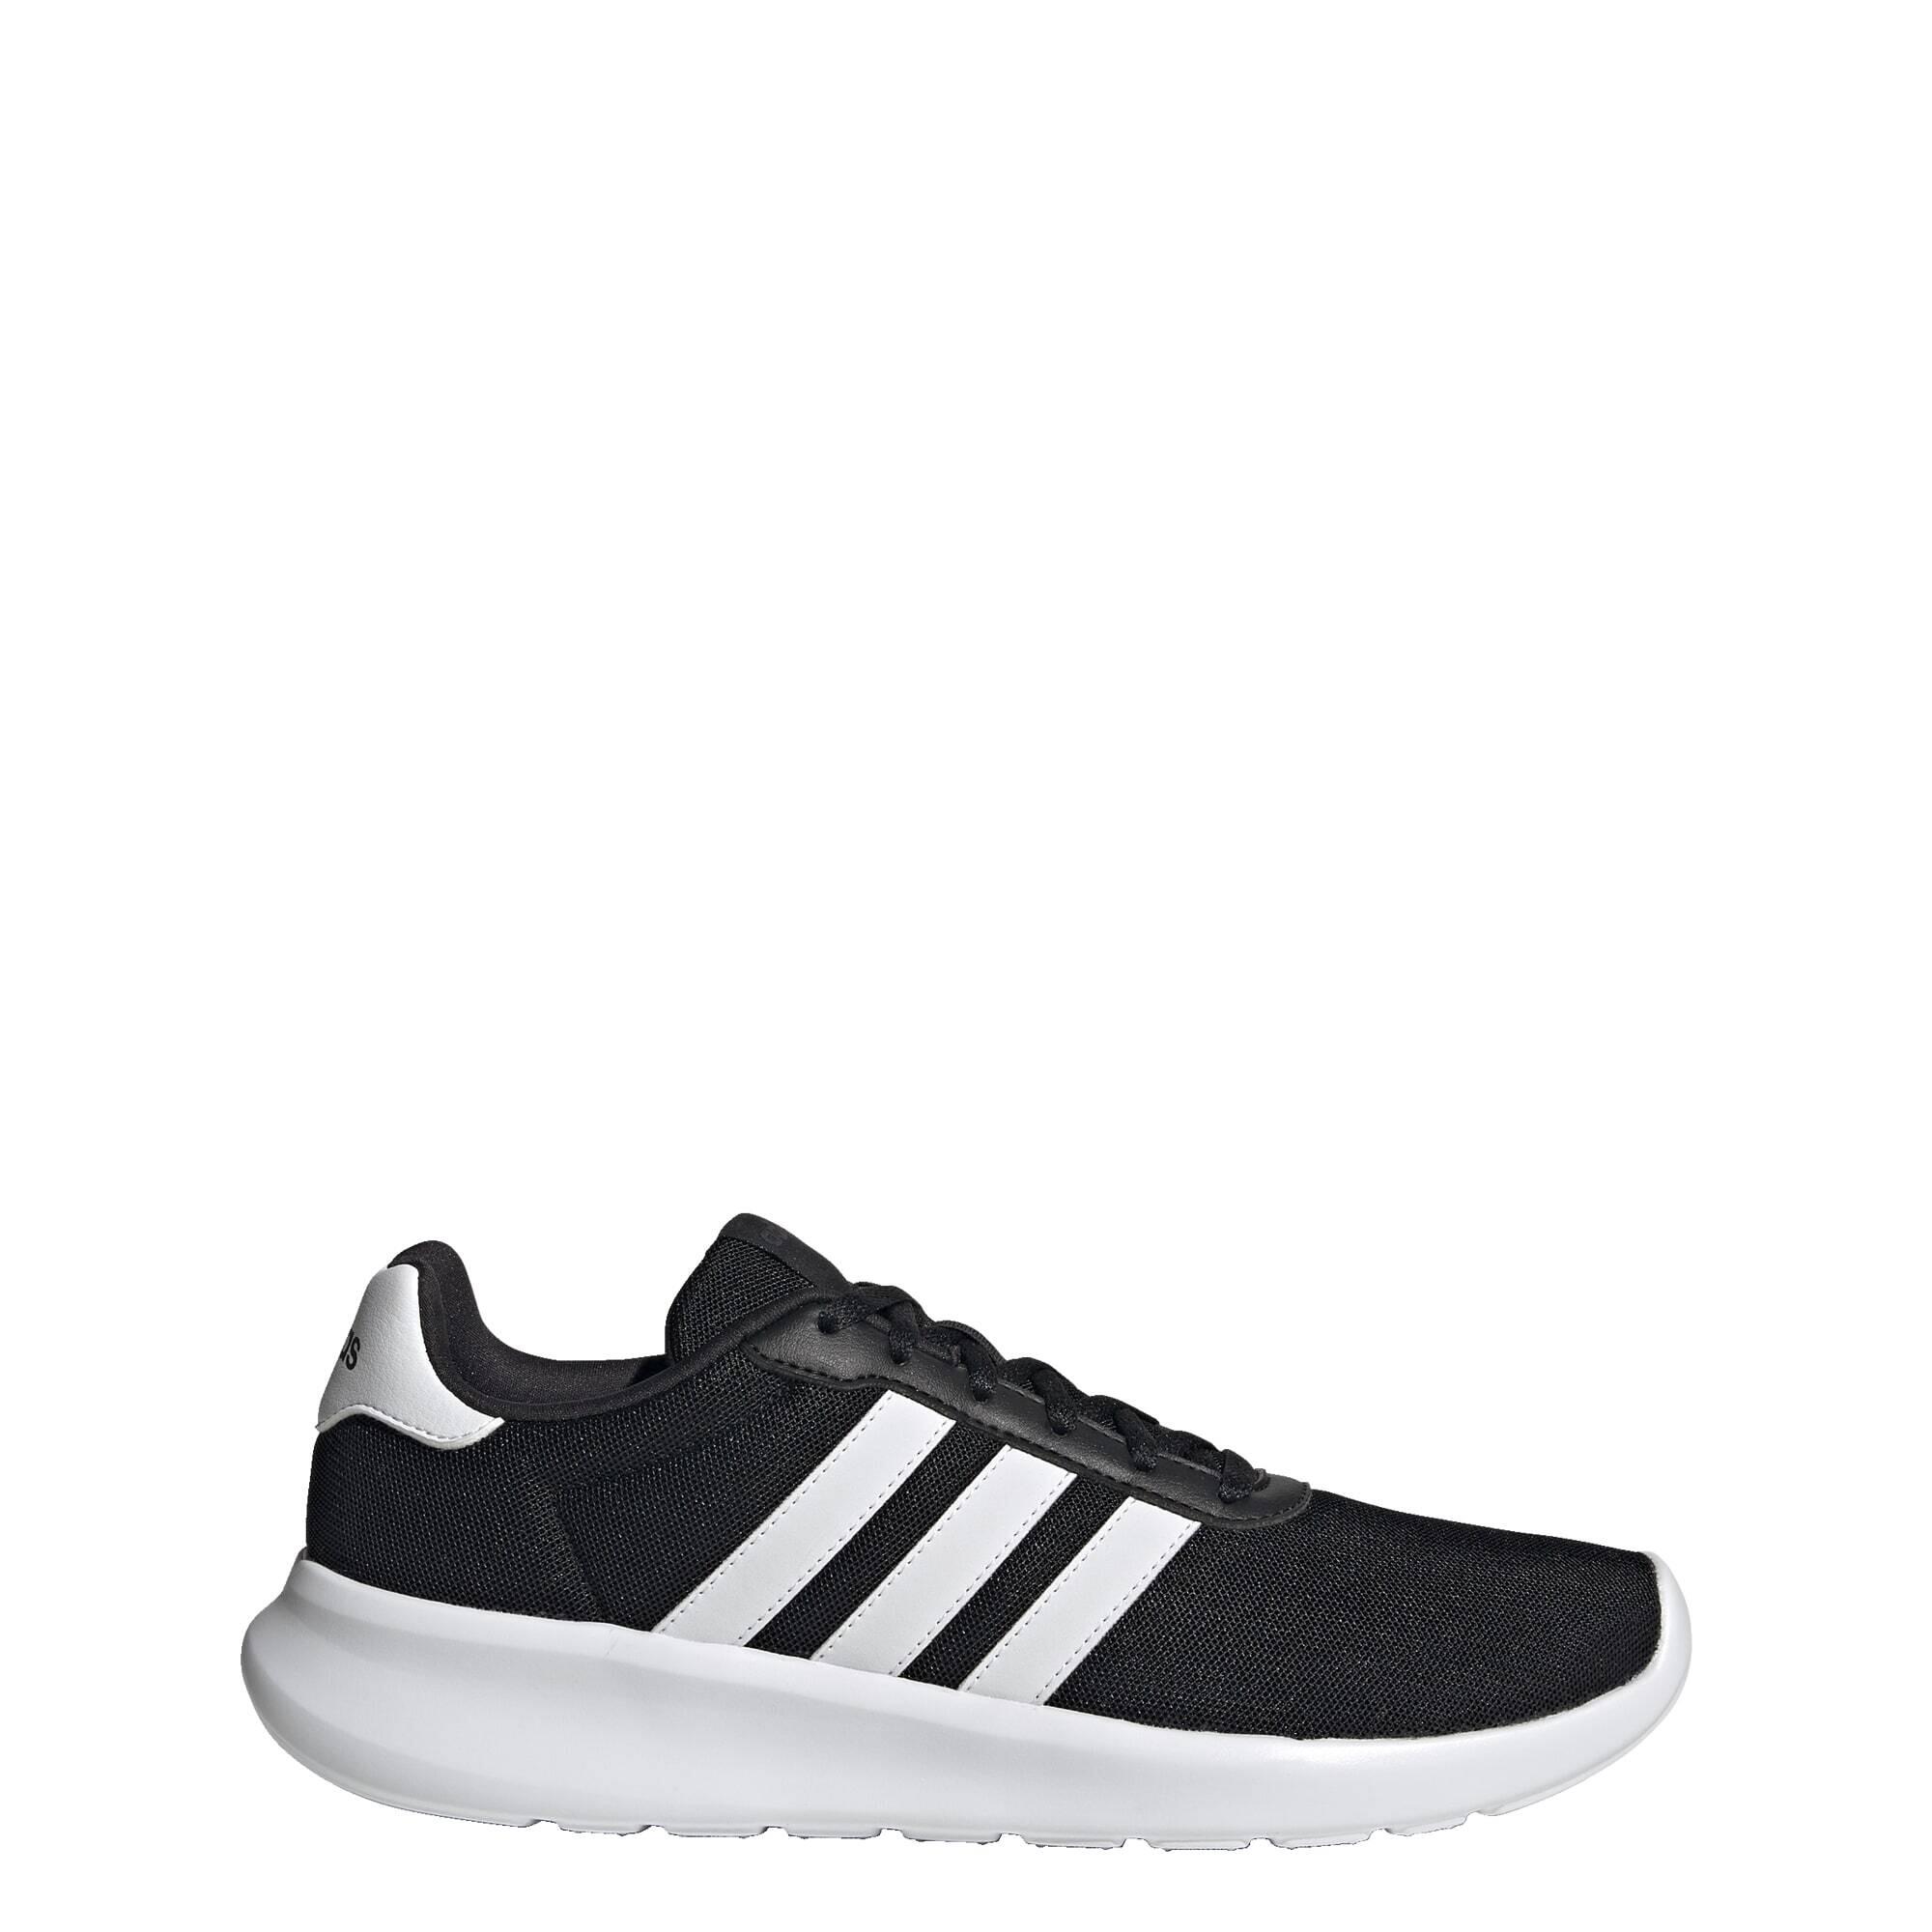 ADIDAS Lite Racer 3.0 Shoes